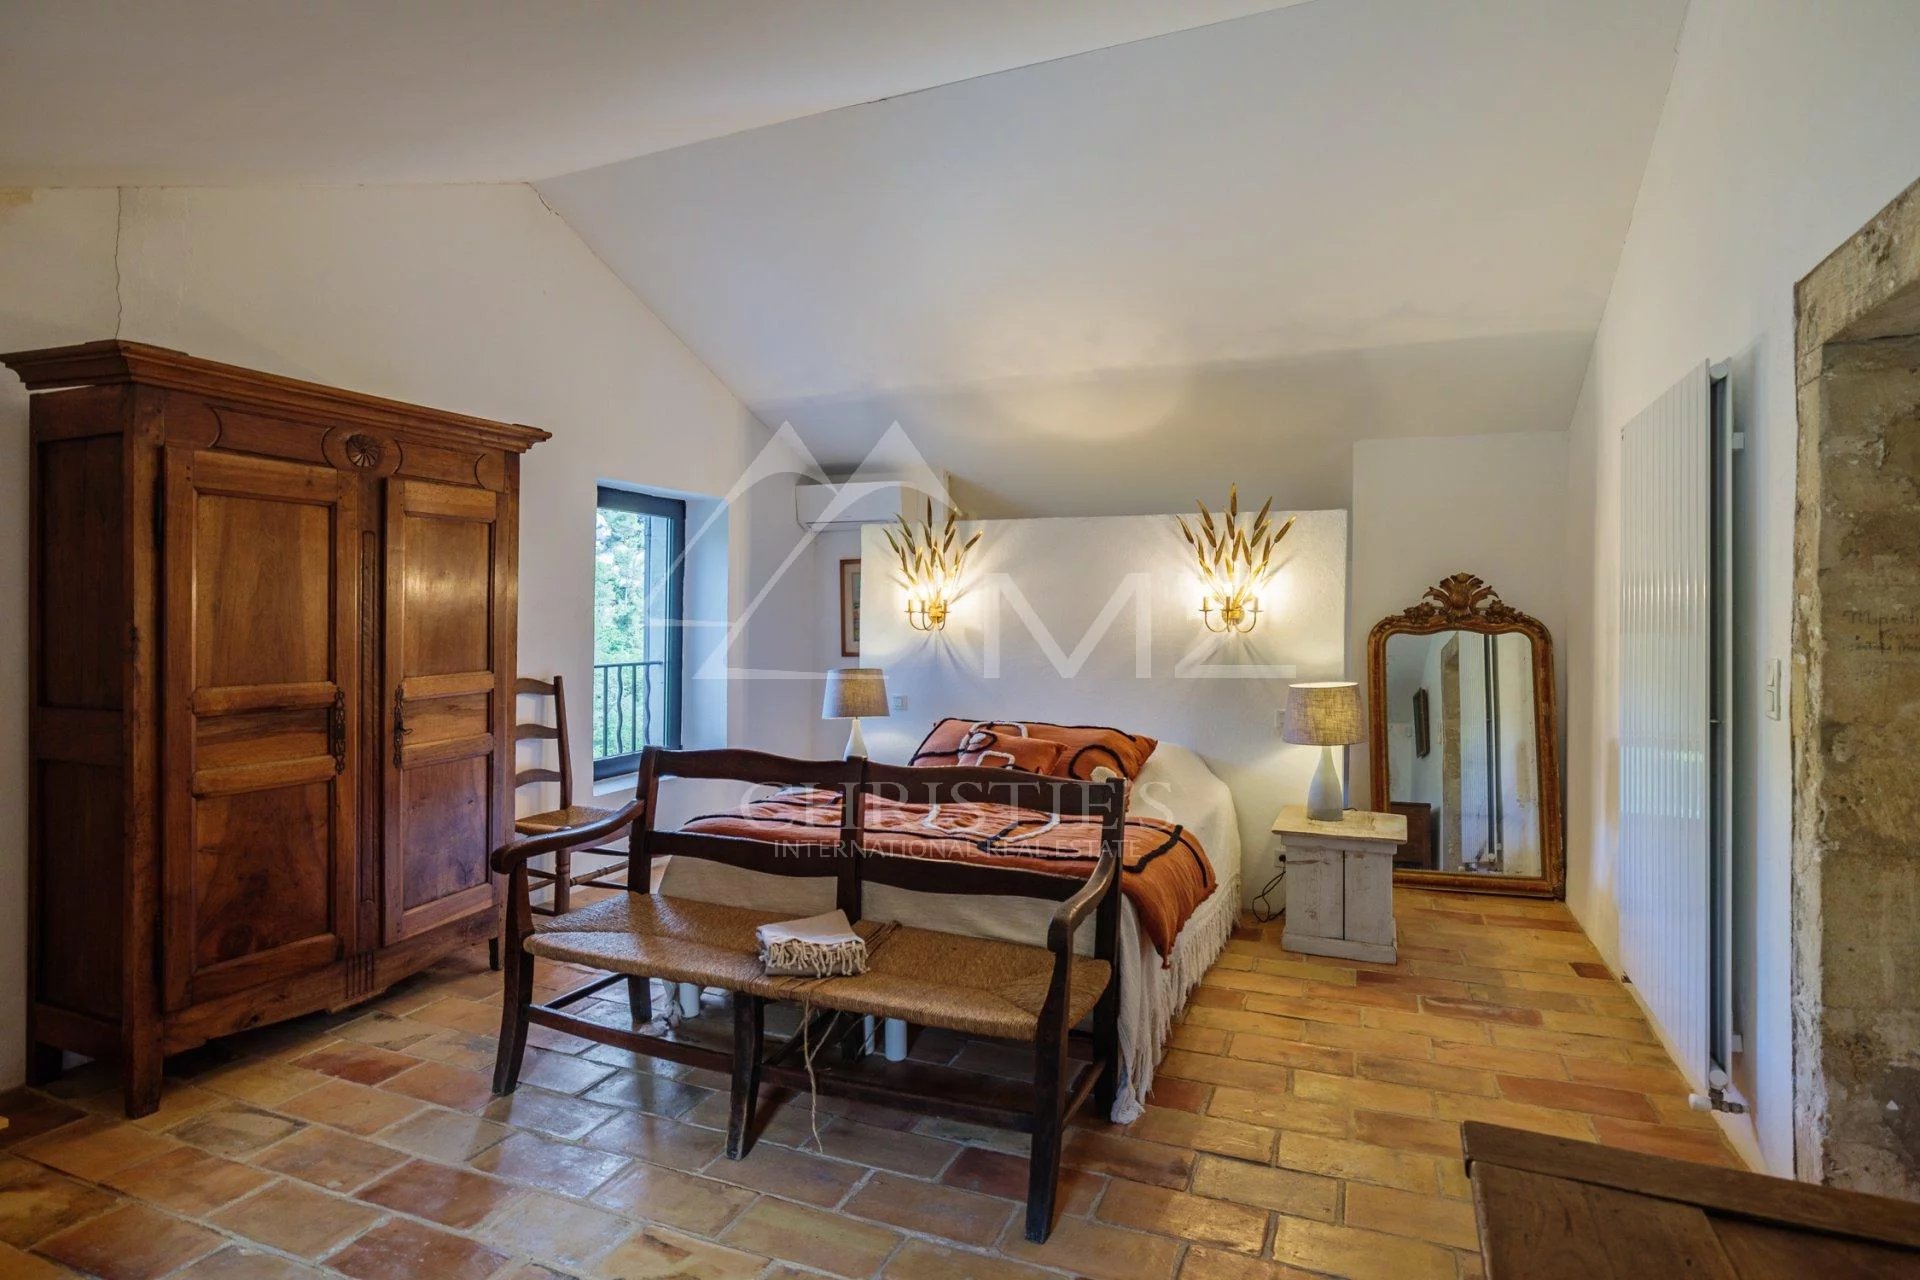 Luberon - Beautiful stone house in a wonderful and natural setting